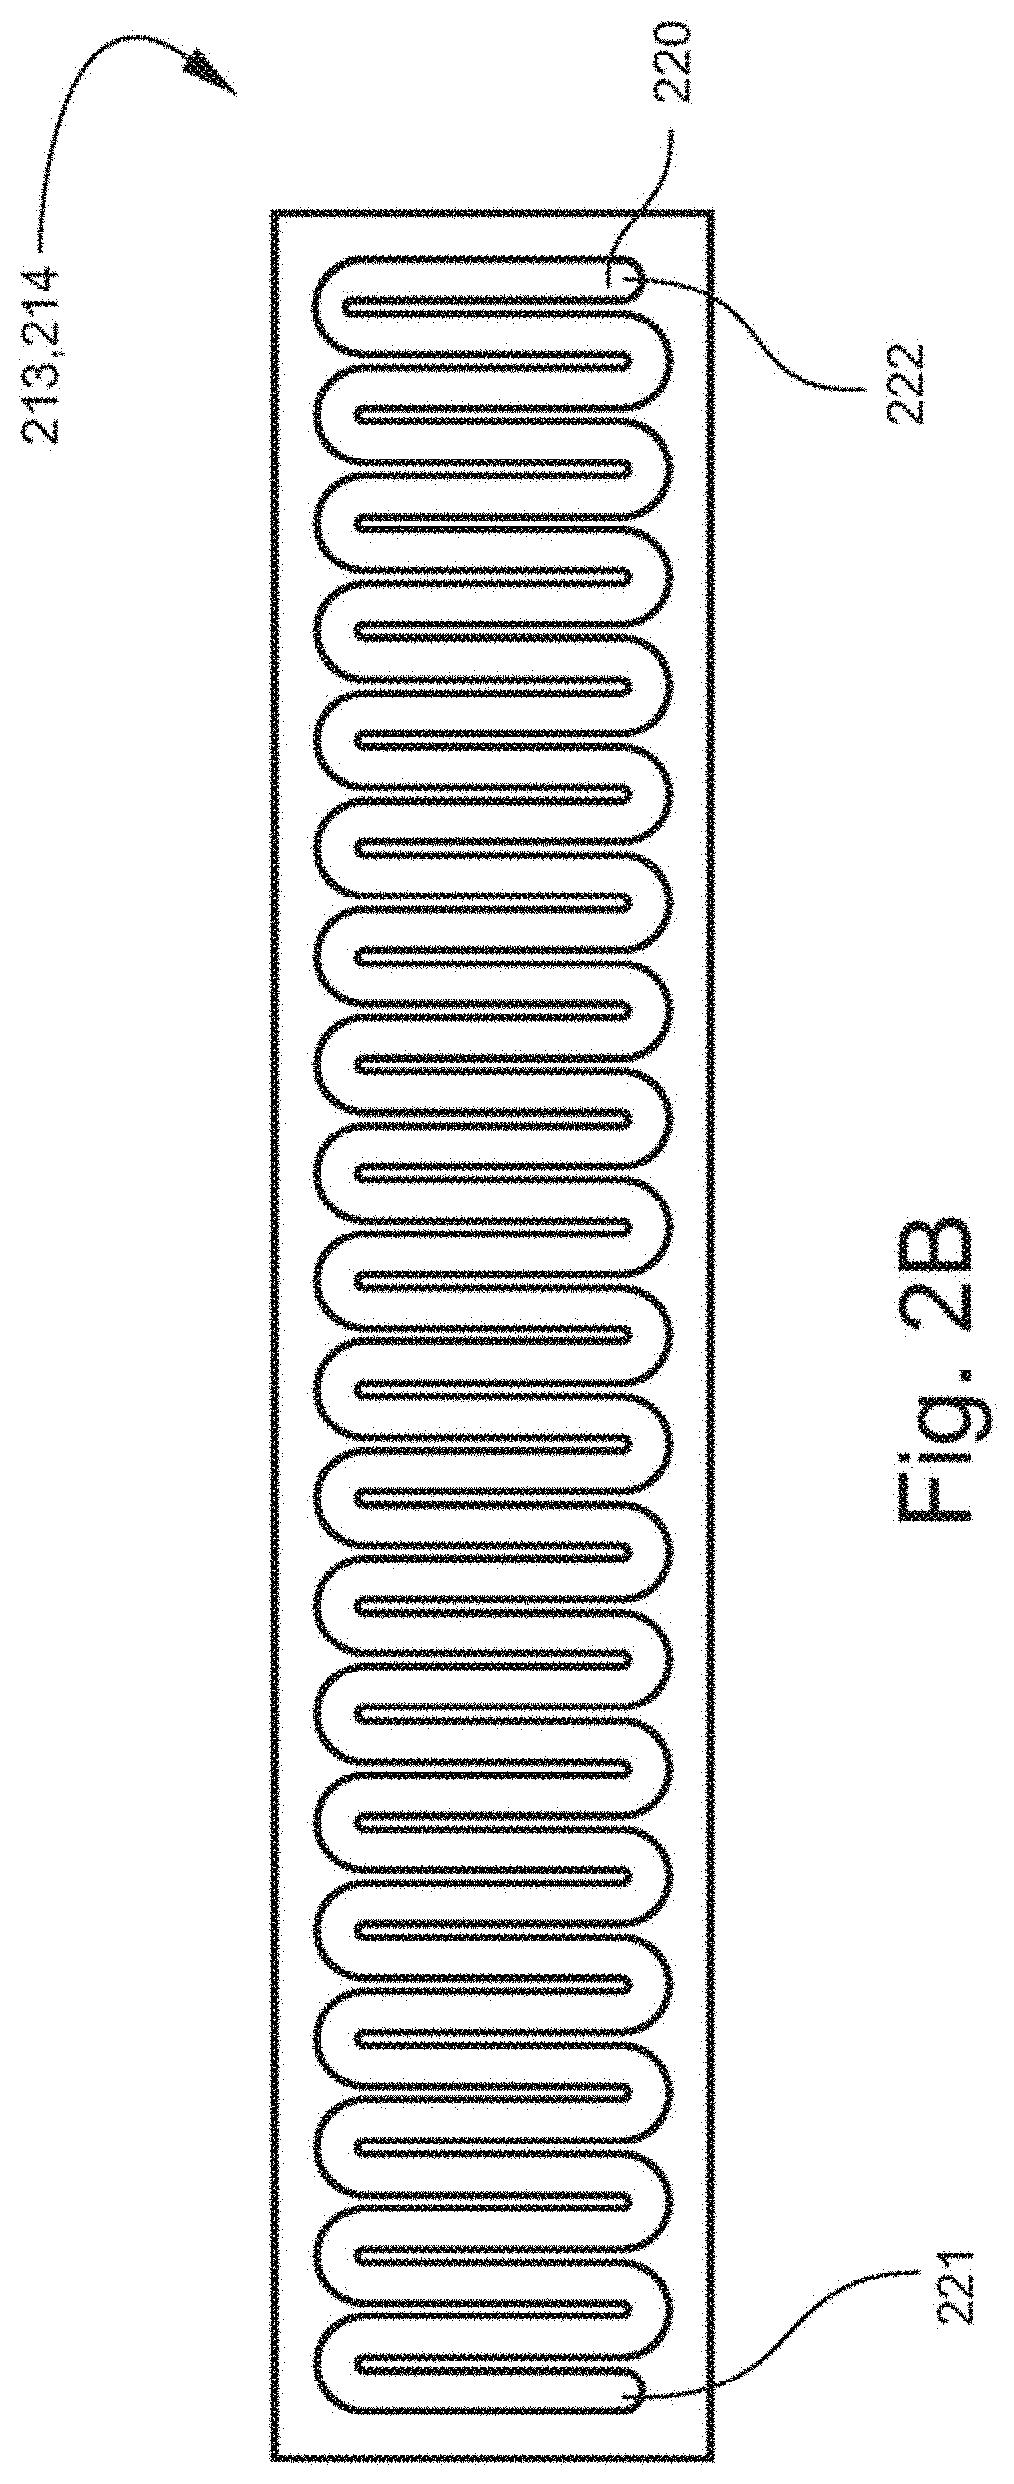 Method and device for forming composite pasta filata cheese